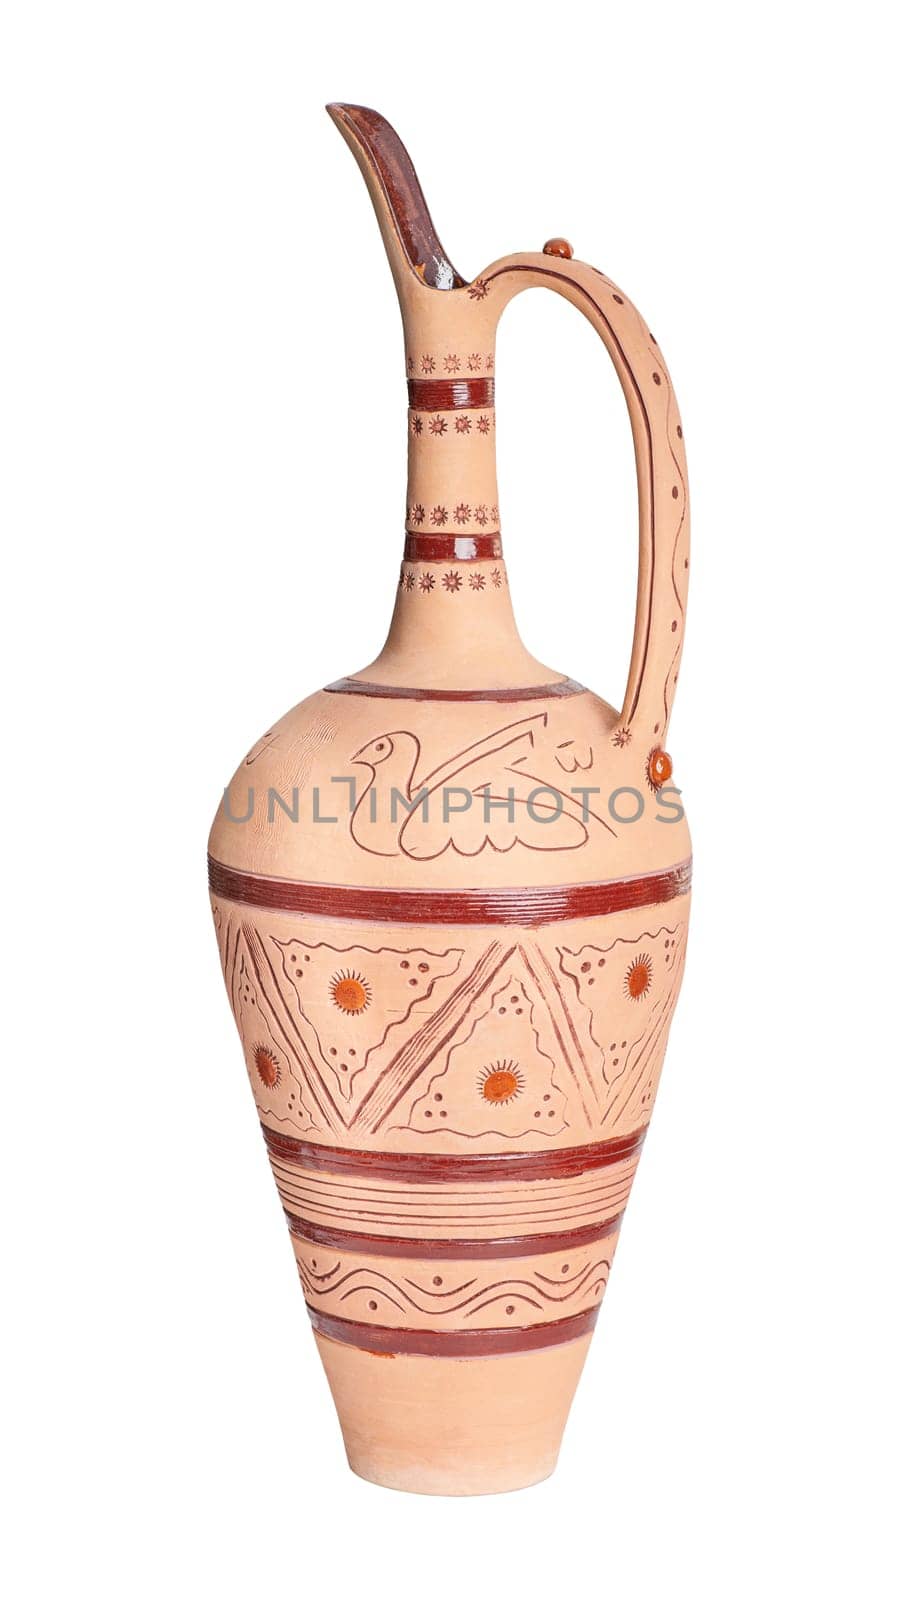 A vintage decorated ceramic jug isolated on a white background